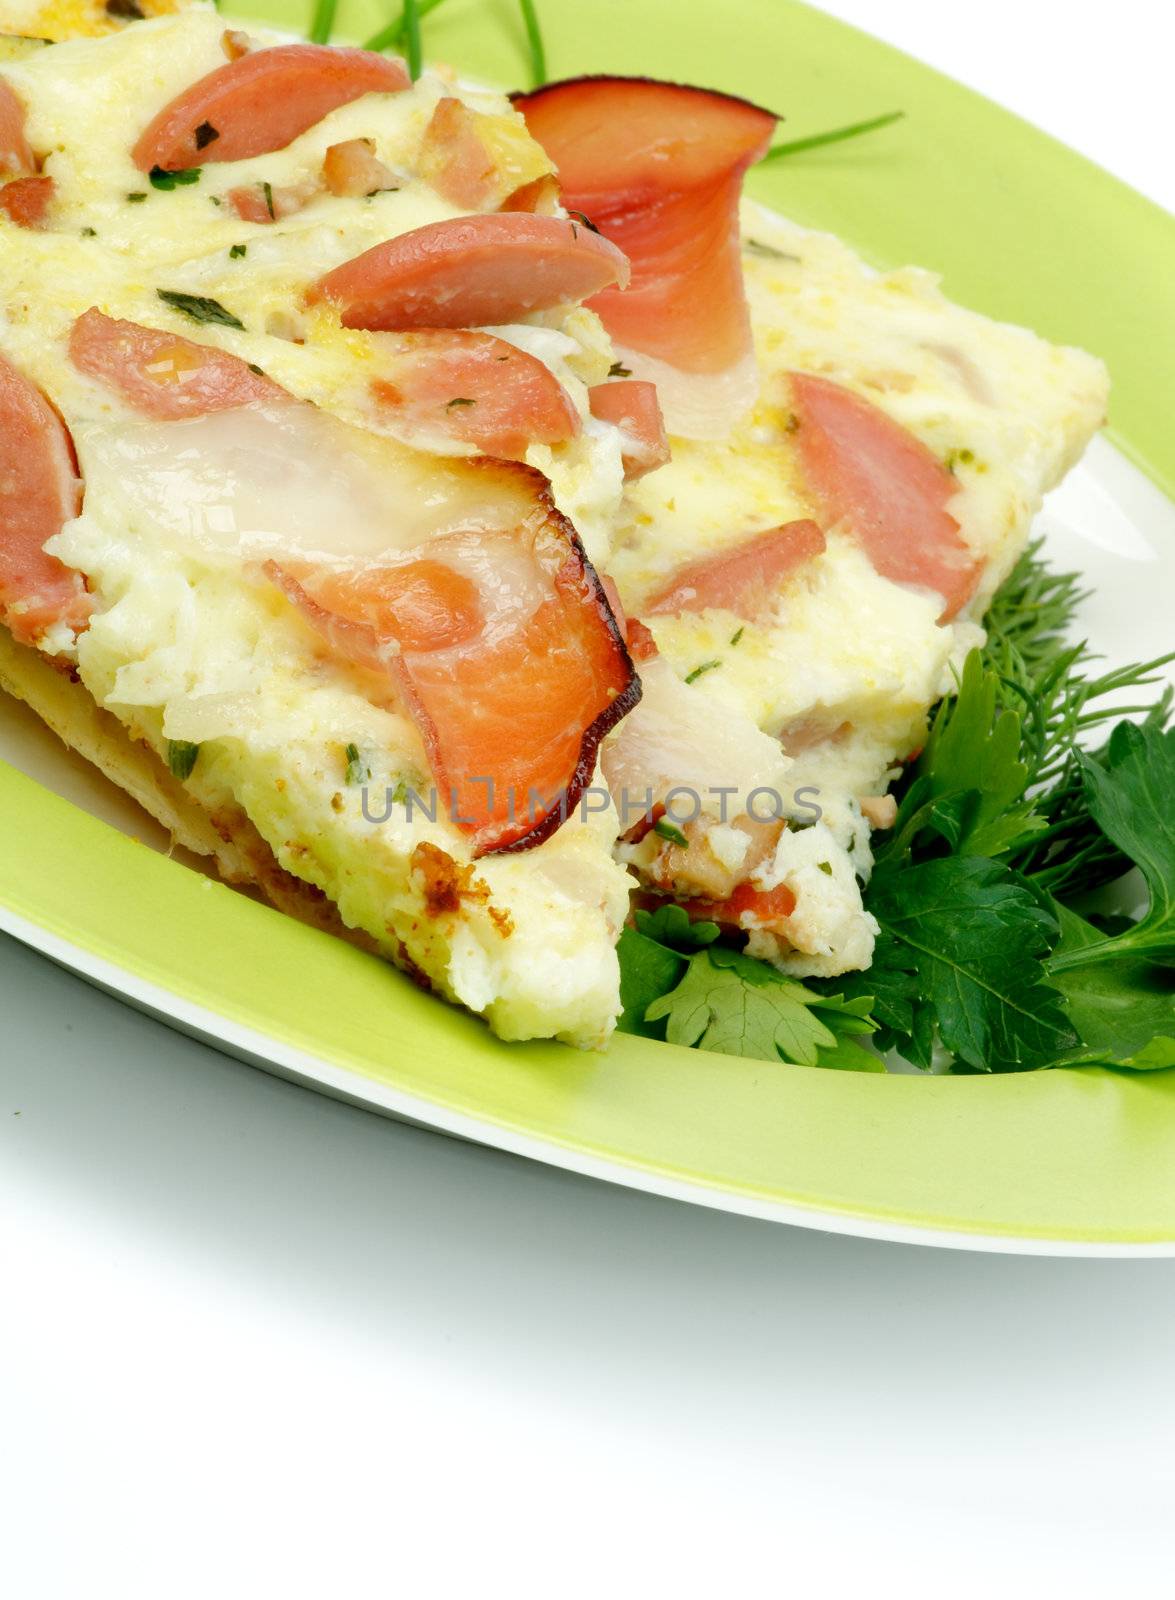 Bacon and Sausage Omelet by zhekos